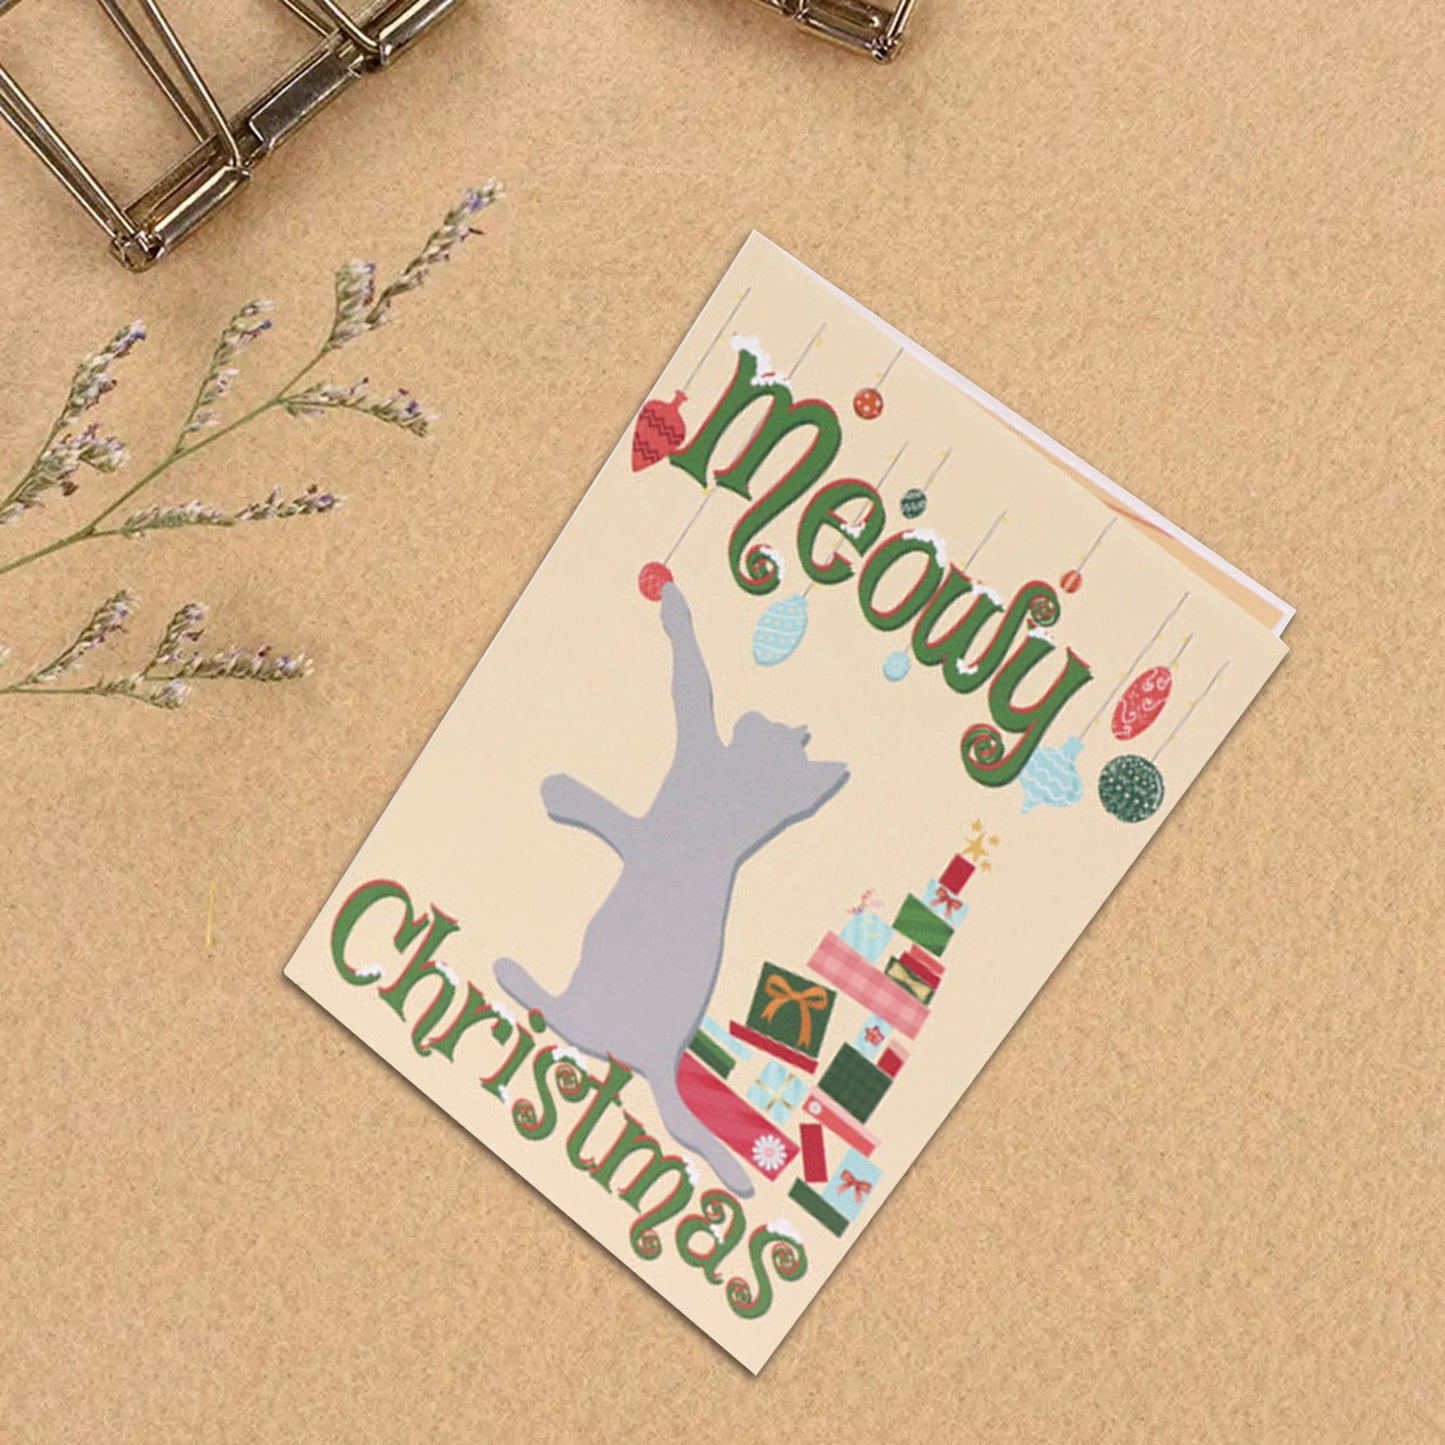 Christmas 3D pop-up card – Cat Home Greeting Card